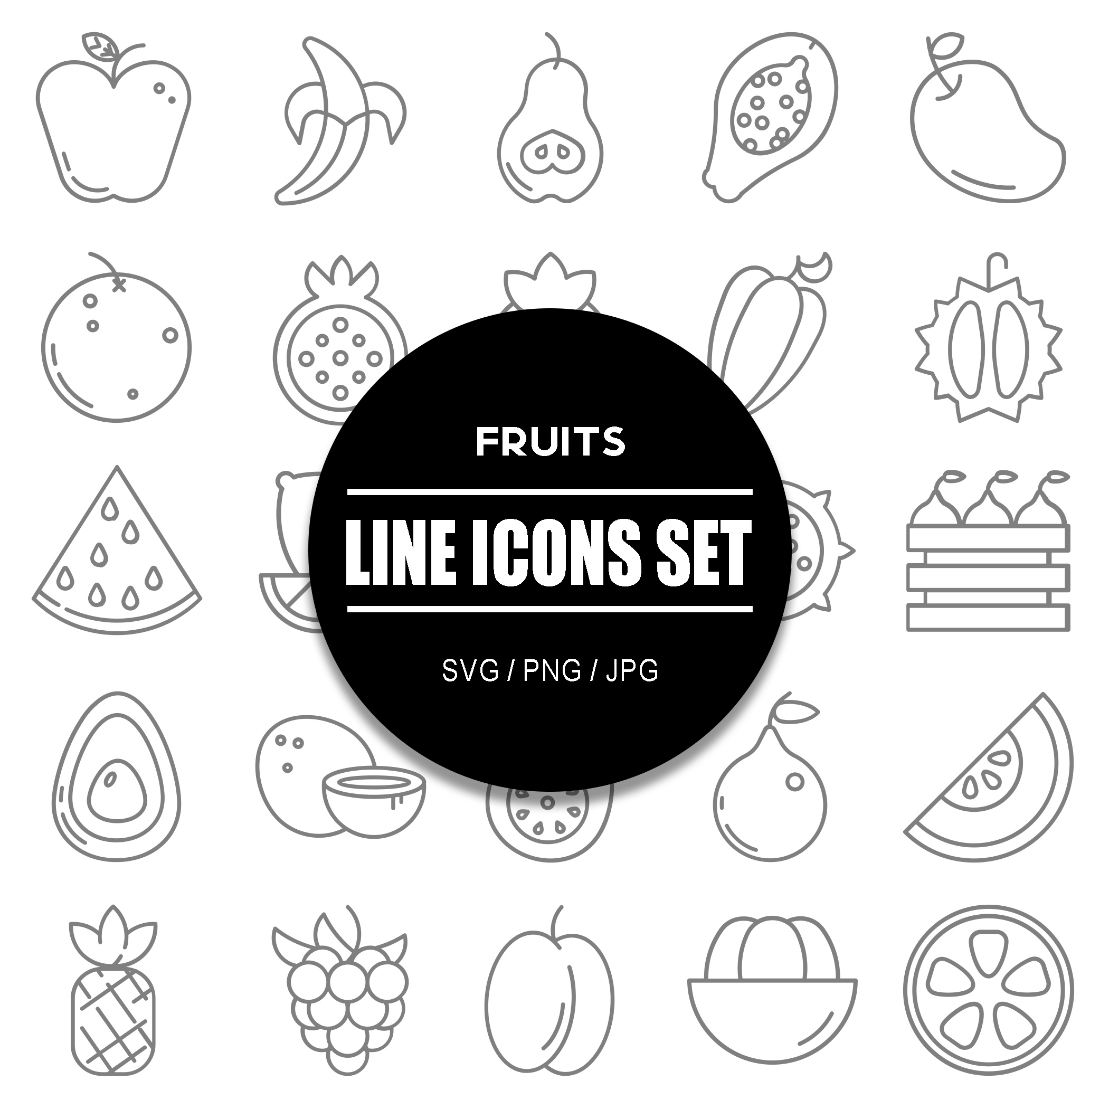 Fruits Line Icon Set cover image.